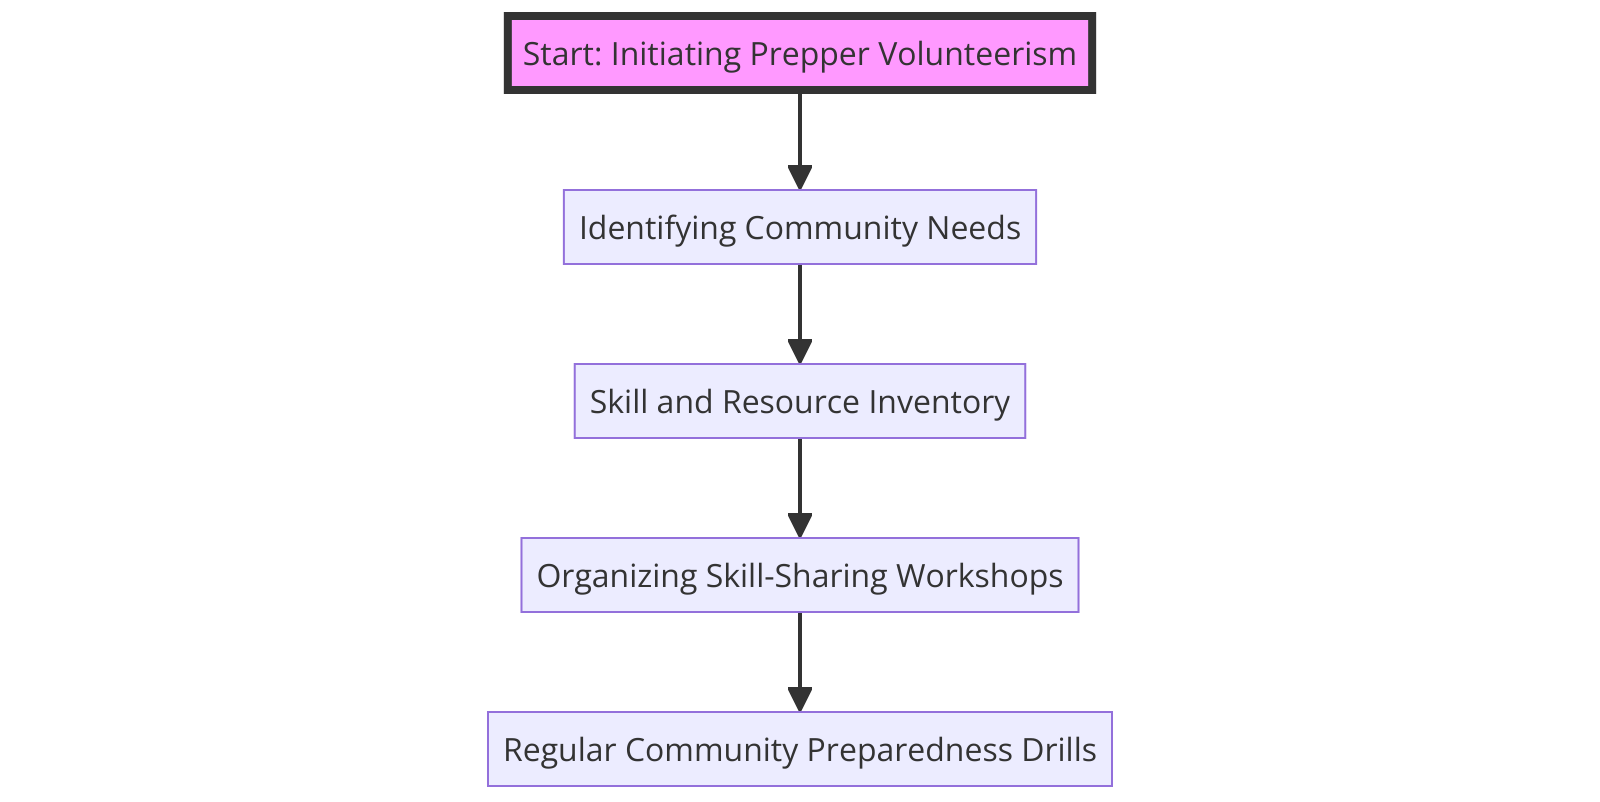 the steps of initiating and maintaining prepper volunteerism within a community